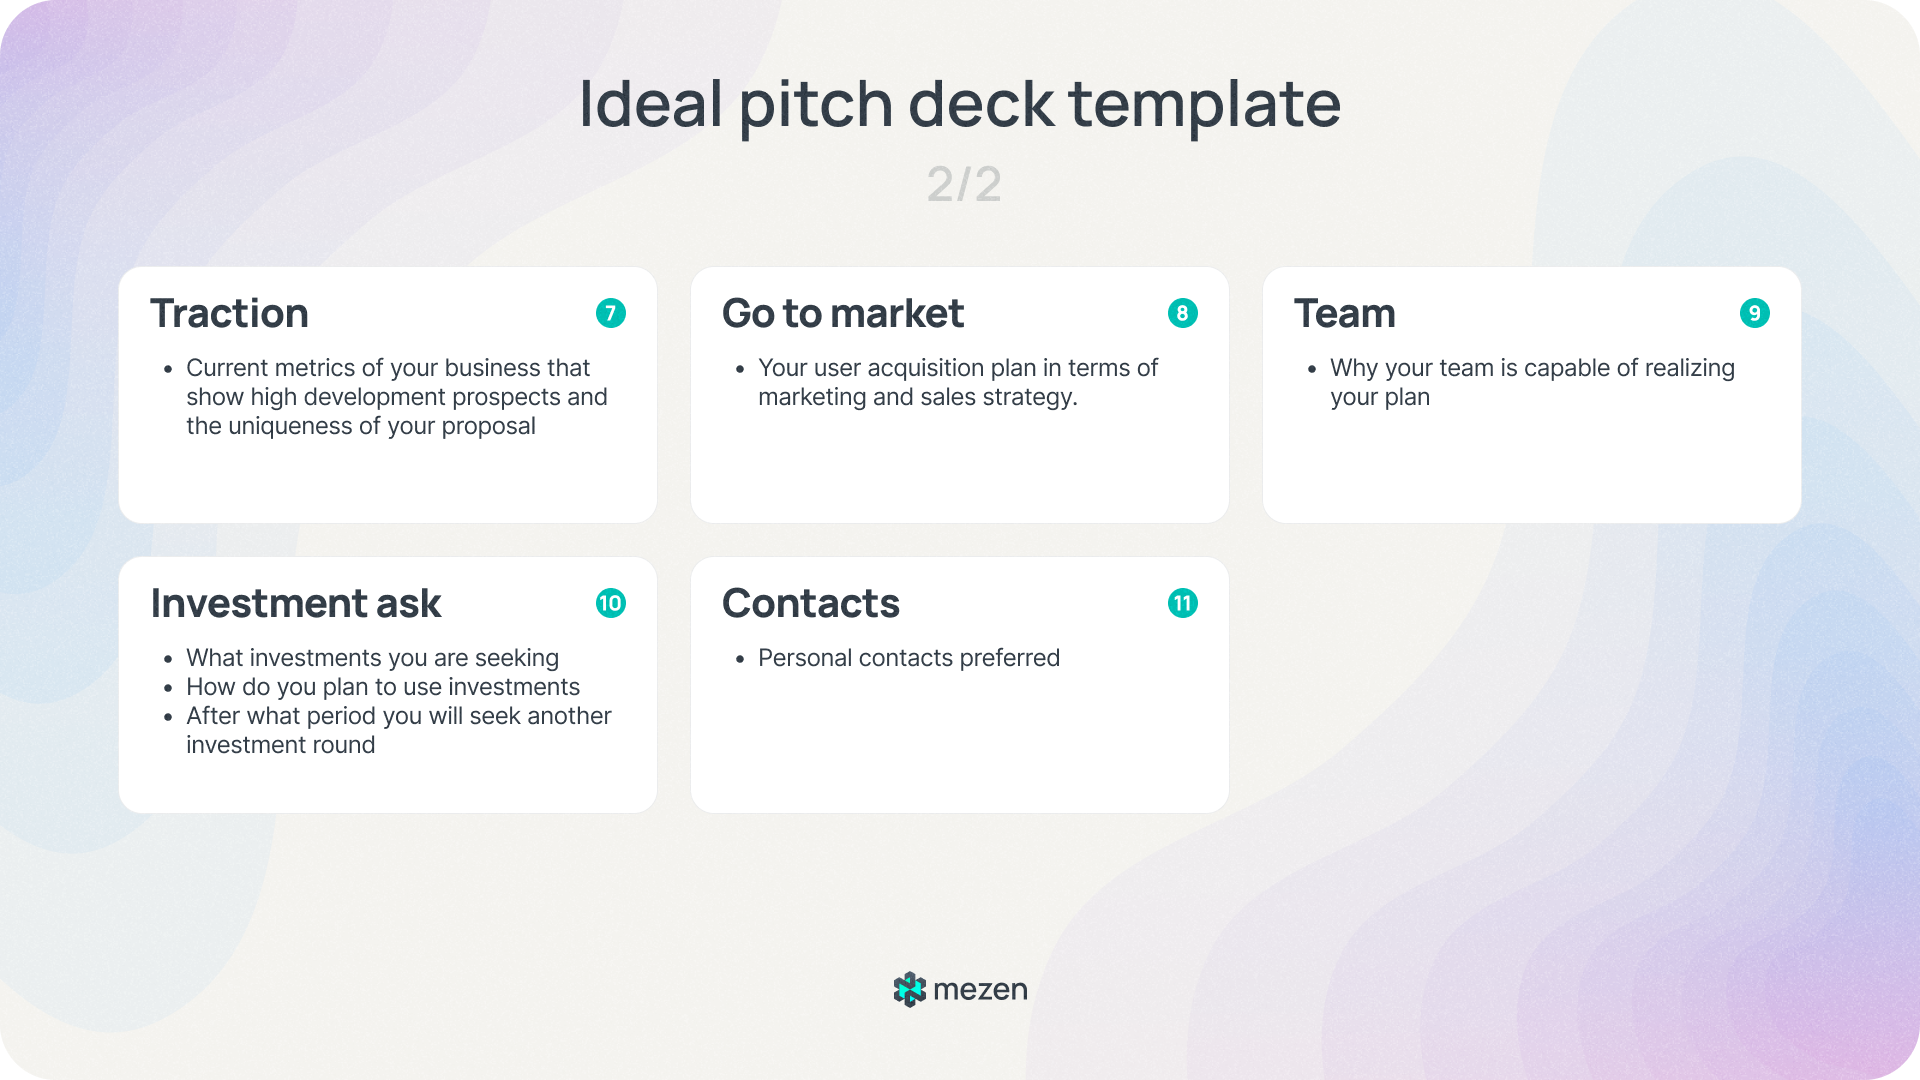 Effective pitch strategies for startups